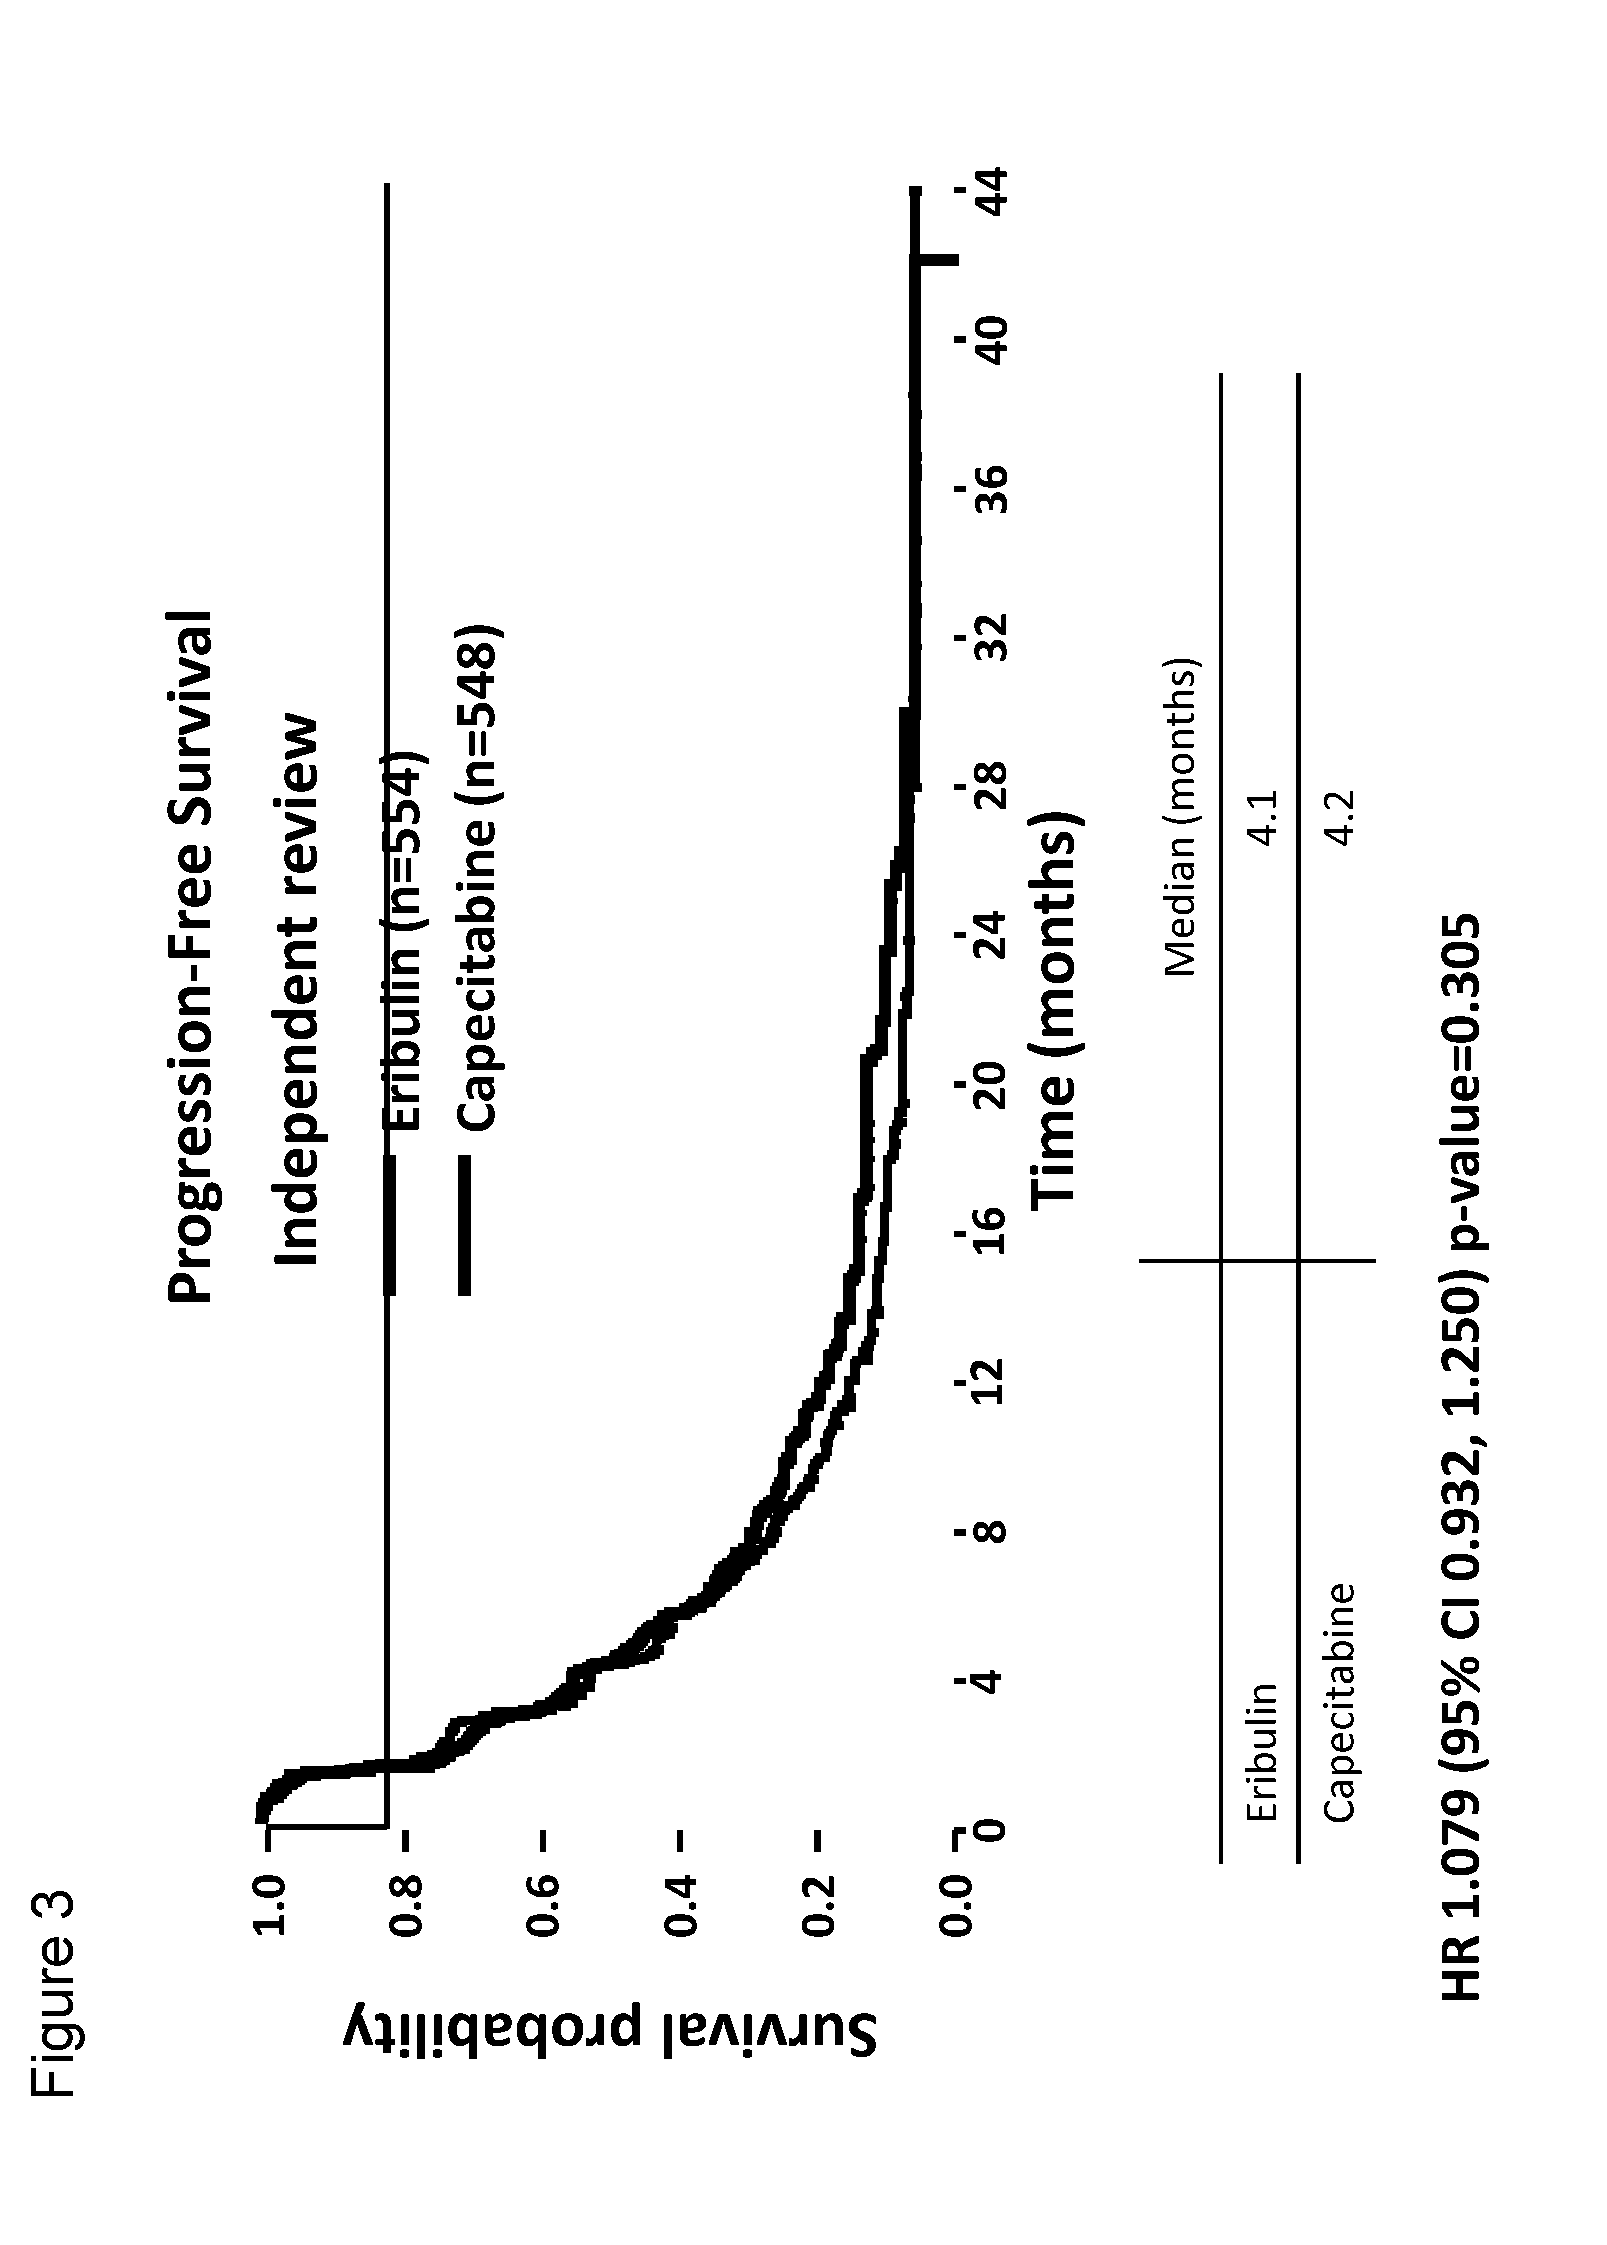 Use of eribulin in the treatment of breast cancer